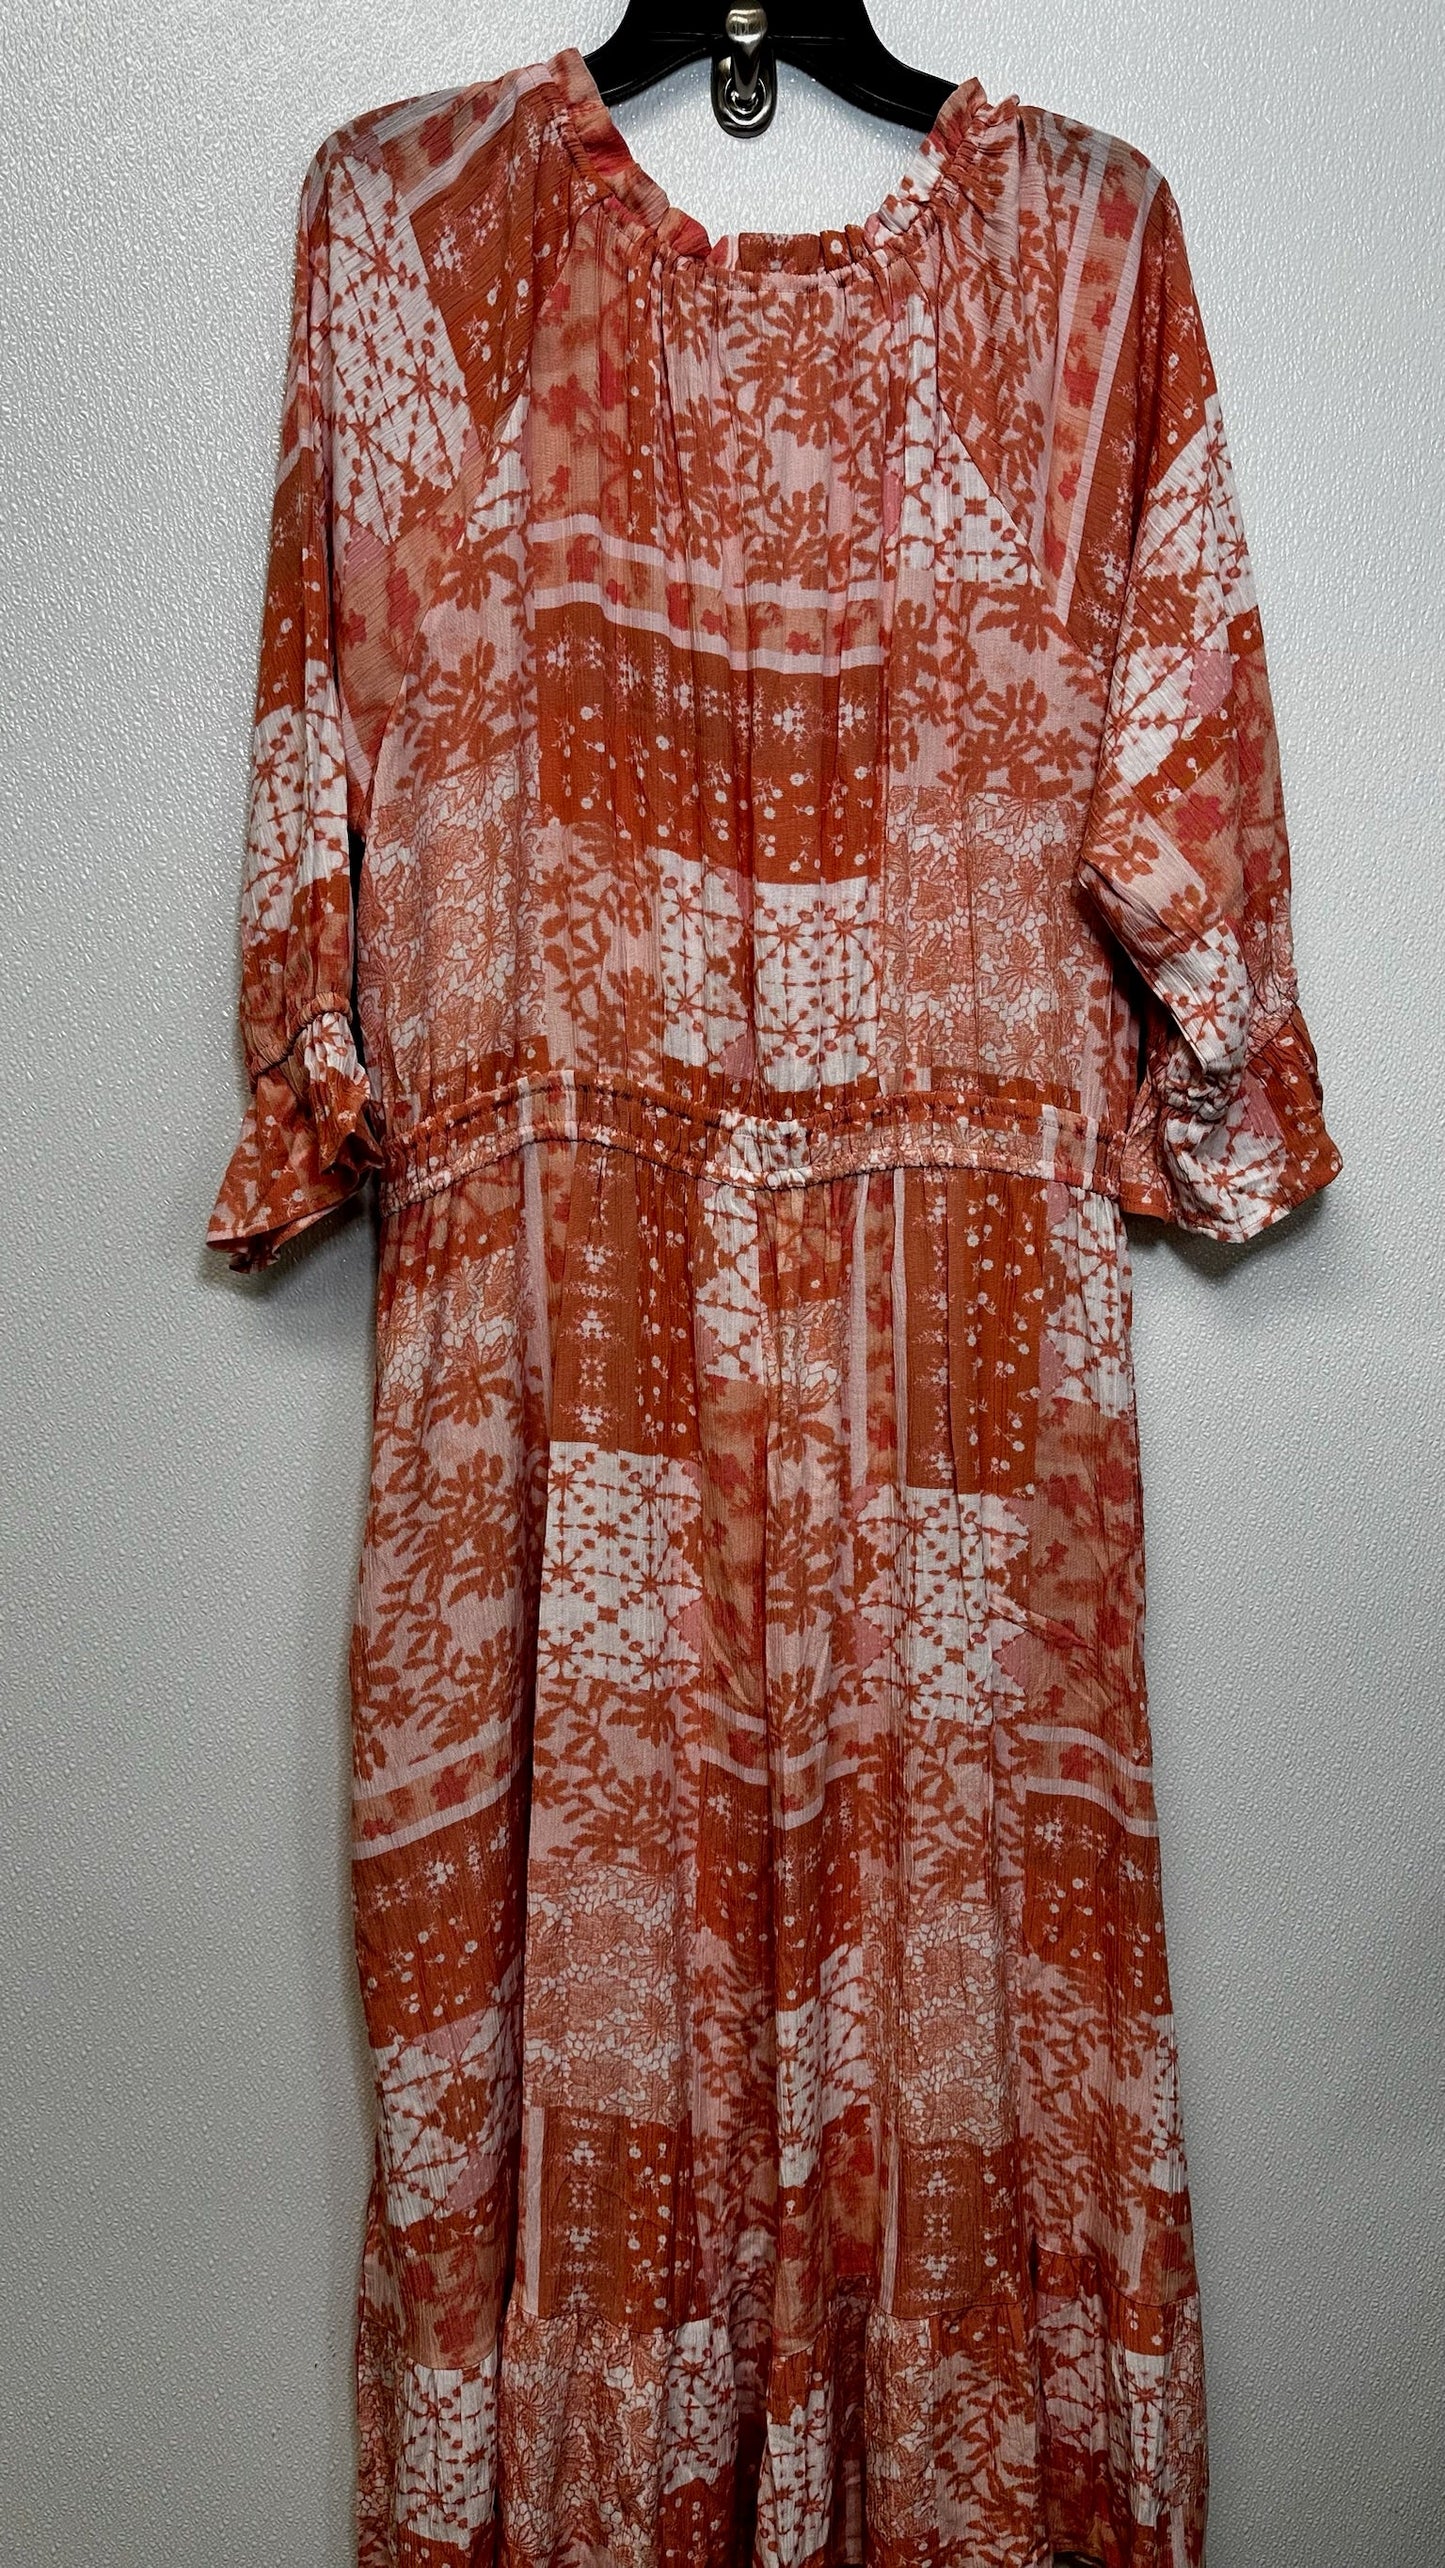 Coral Dress Casual Midi Frye And Co, Size Xxl